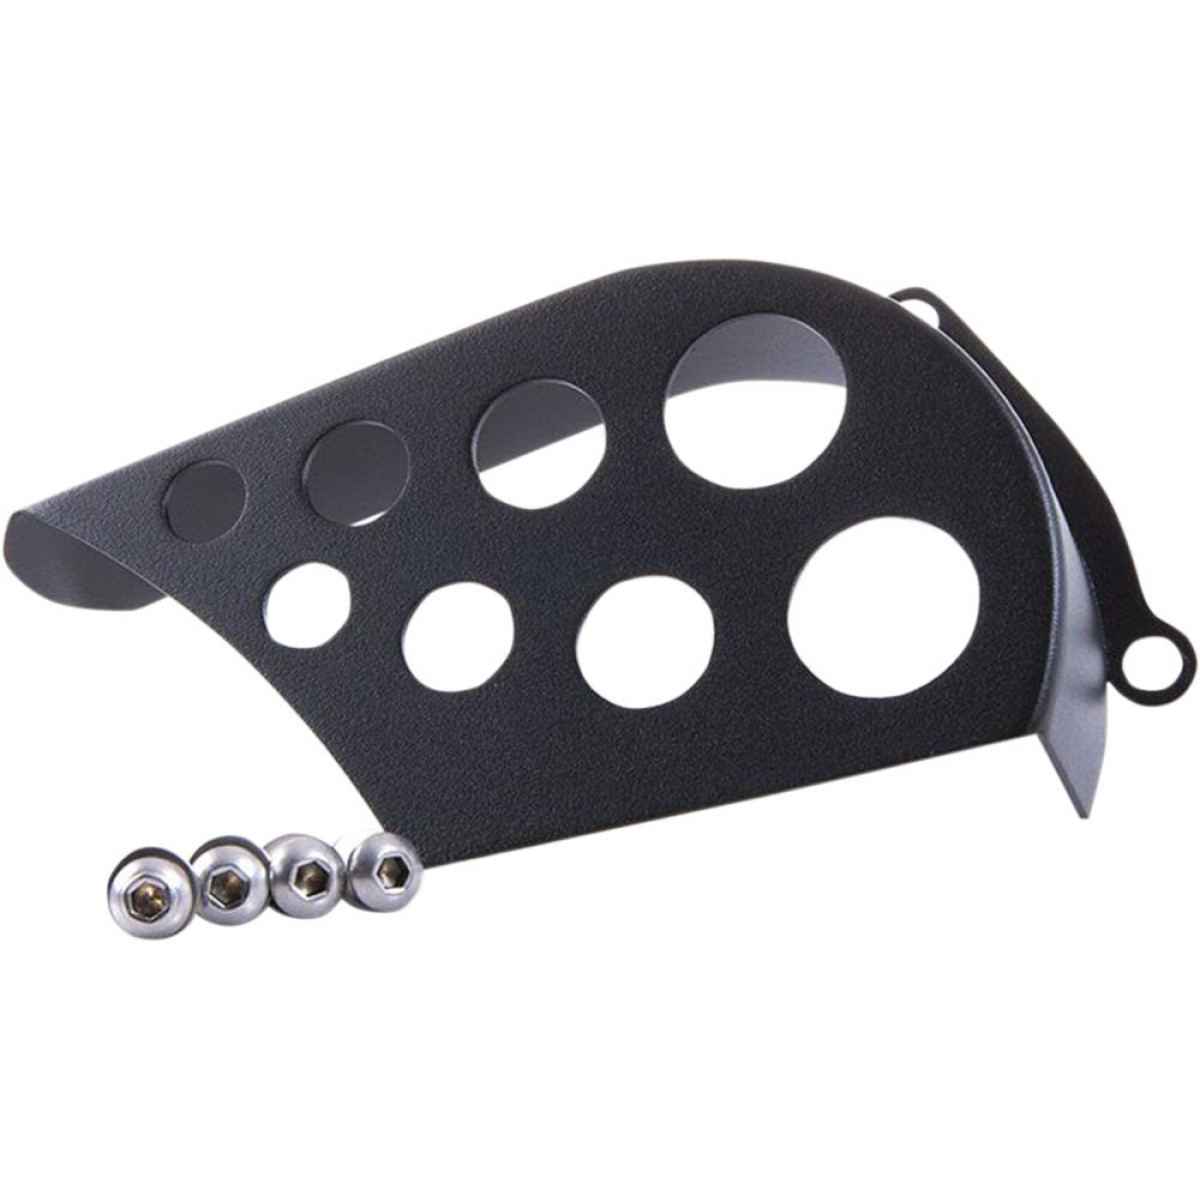 TRIUMPH FRONT SPROCKET COVER STAINLESS STEEL BLACK